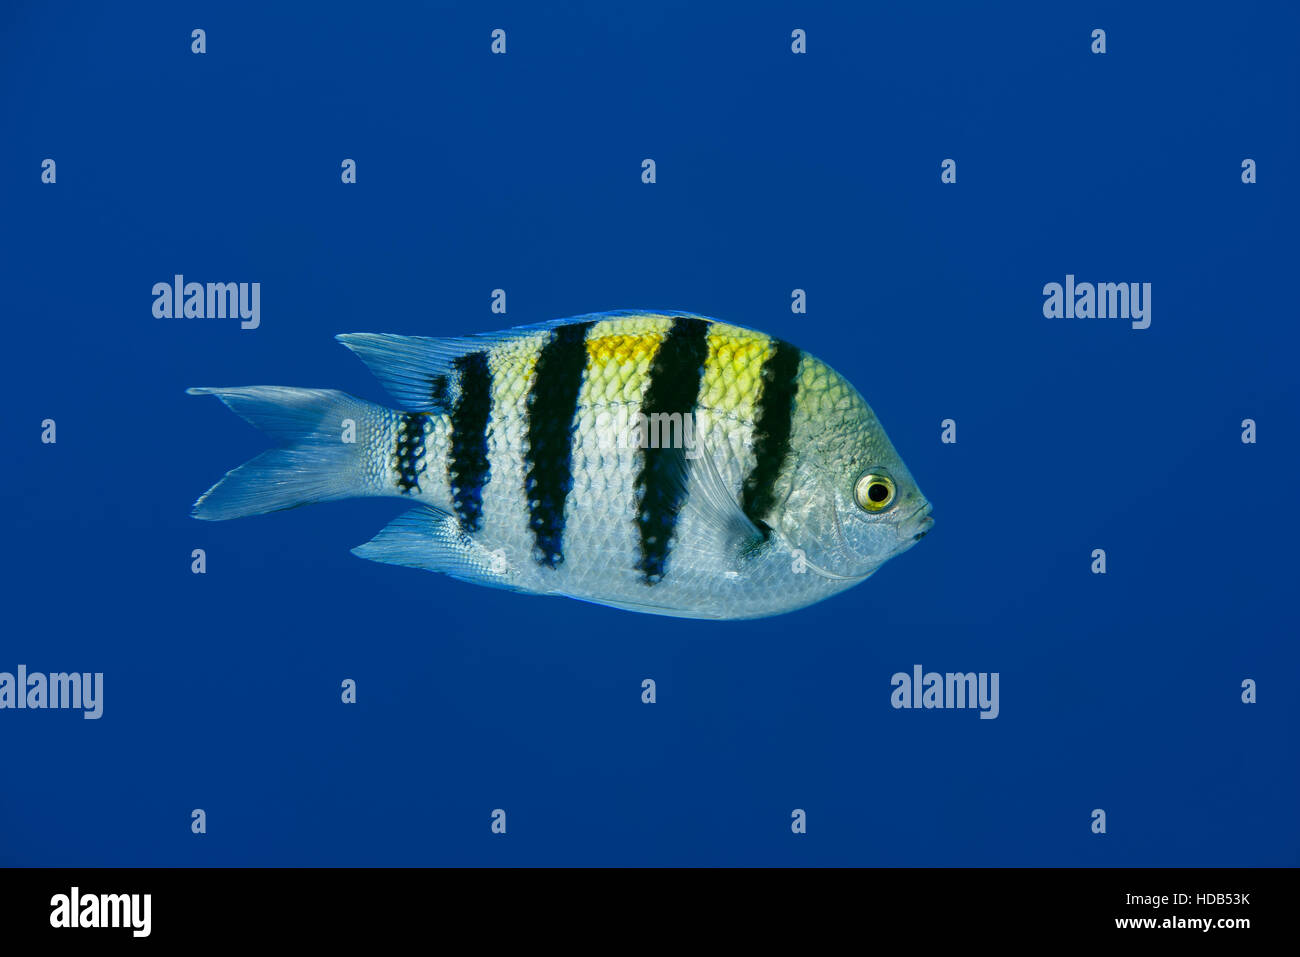 Indo-Pacific sergeant, Sergeant major or Common sergeant (Abudefduf vaigiensis) floats in blue water, Red sea, Sharm El Sheikh, Sinai Peninsula, Egypt Stock Photo